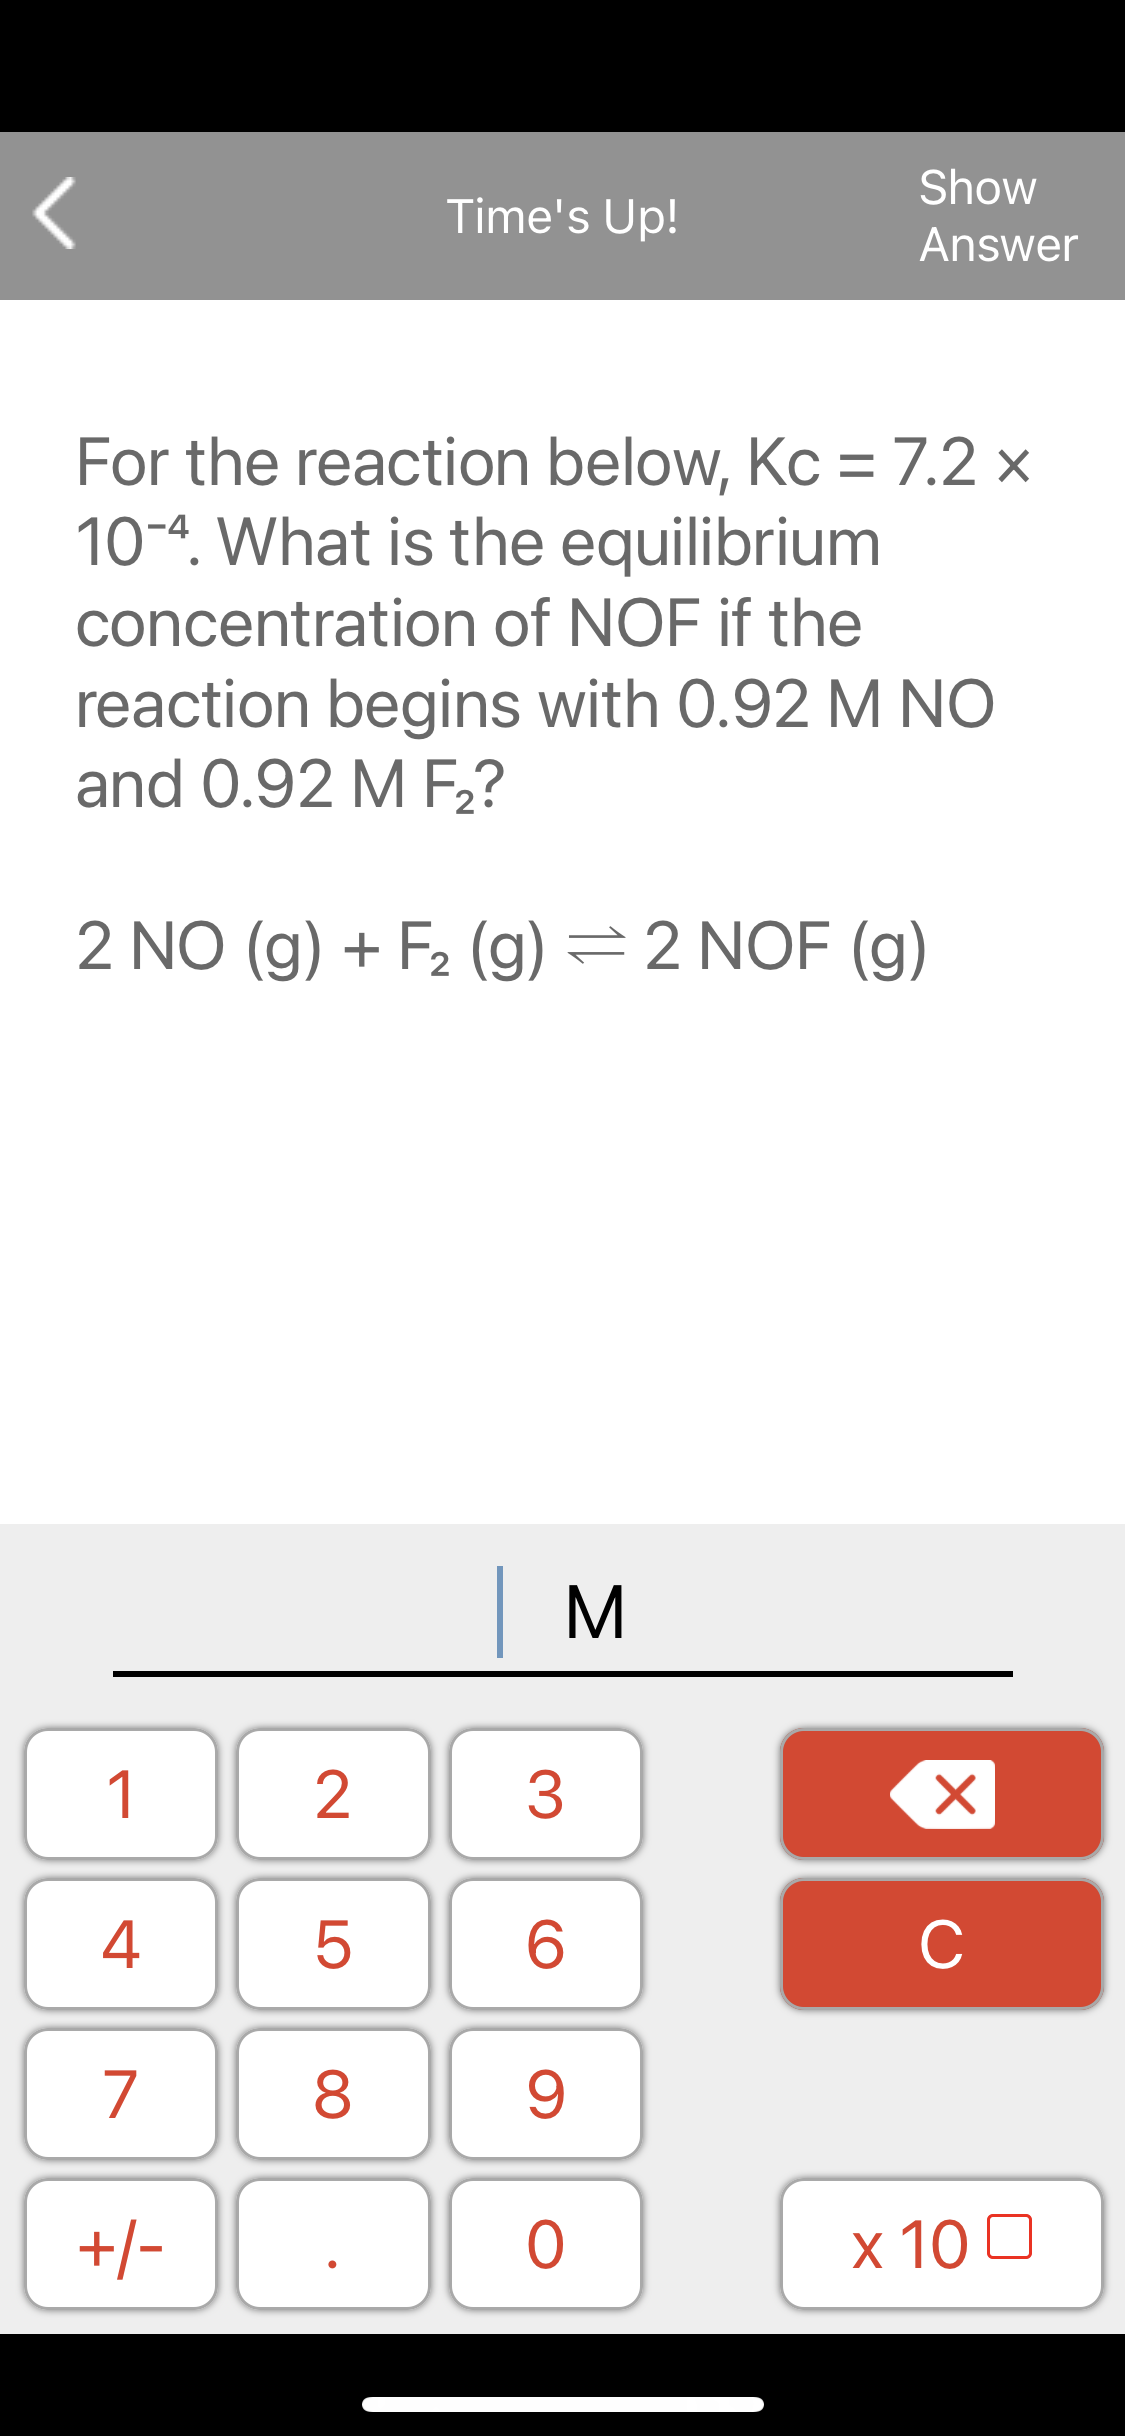 Show
Time's Up!
Answer
For the reaction below, Kc = 7.2 x
10-4. What is the equilibrium
concentration of NOF if the
reaction begins with 0.92 M NO
and 0.92 M F2?
2 NO (g) + F2 (g) =2 NOF (g)
1
2
3
4
C
7
8
+/-
x 10 0
LO
